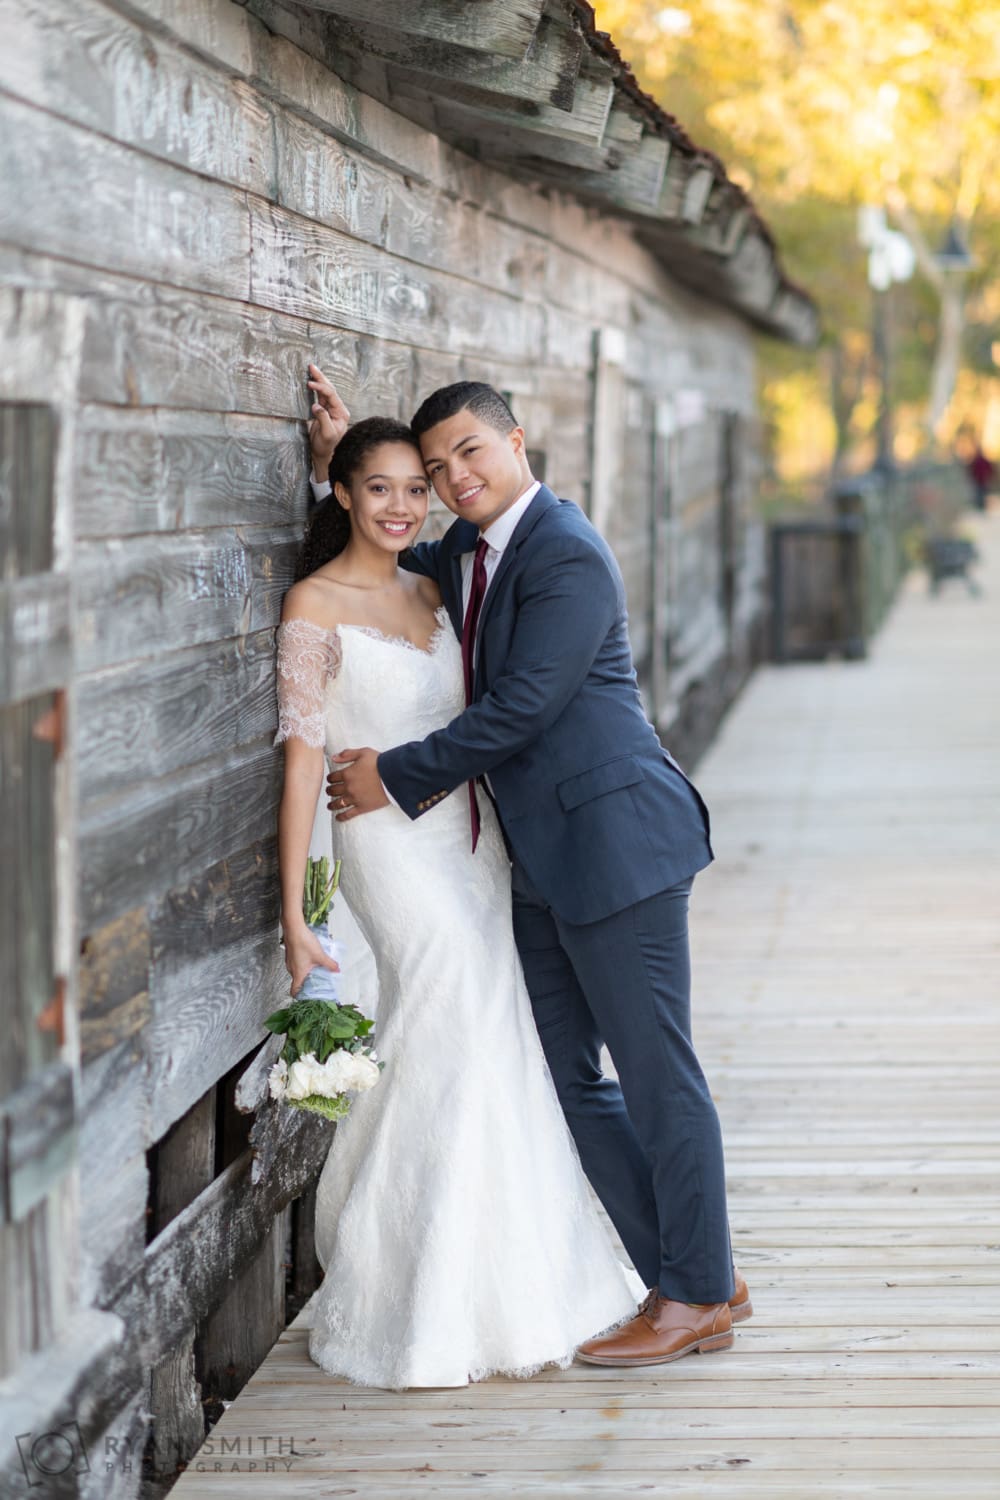 Bride and groom leaning on the rustic wood - Conway Riverwalk